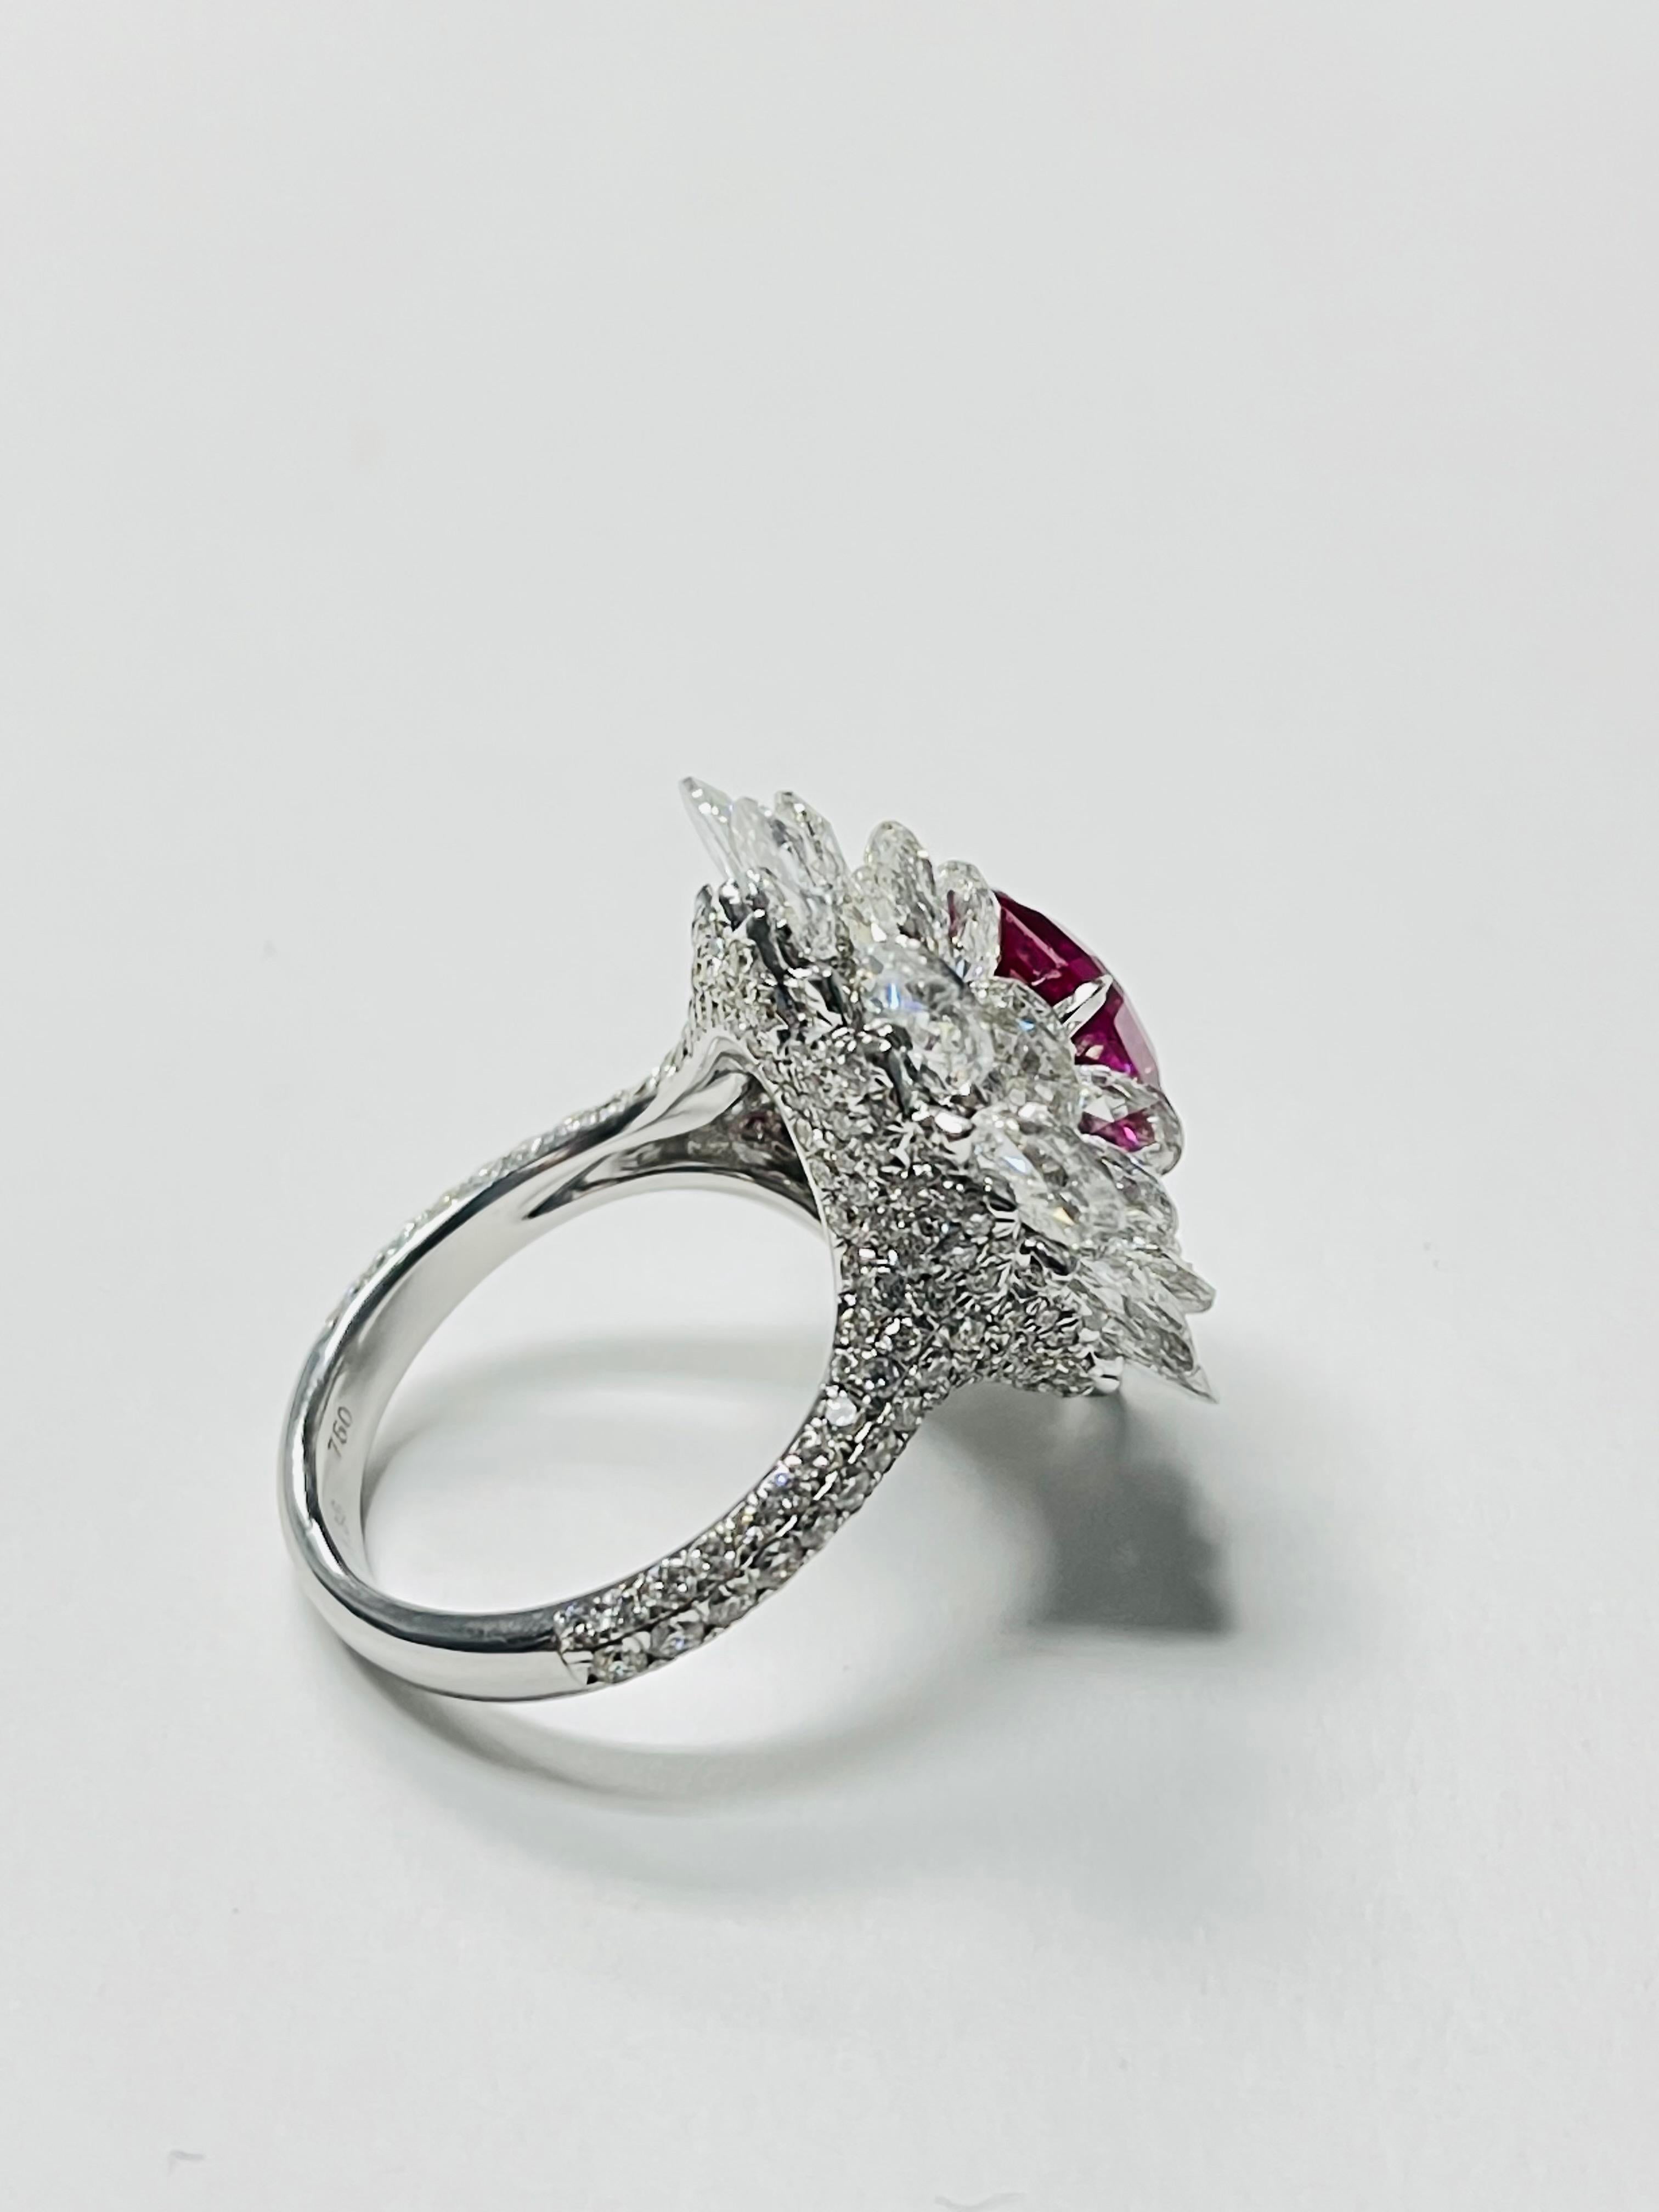   Ruby And Diamond Ring , BURMA NO HEAT GUBELIN AND GIA CERTIFIED  In New Condition For Sale In New York, NY